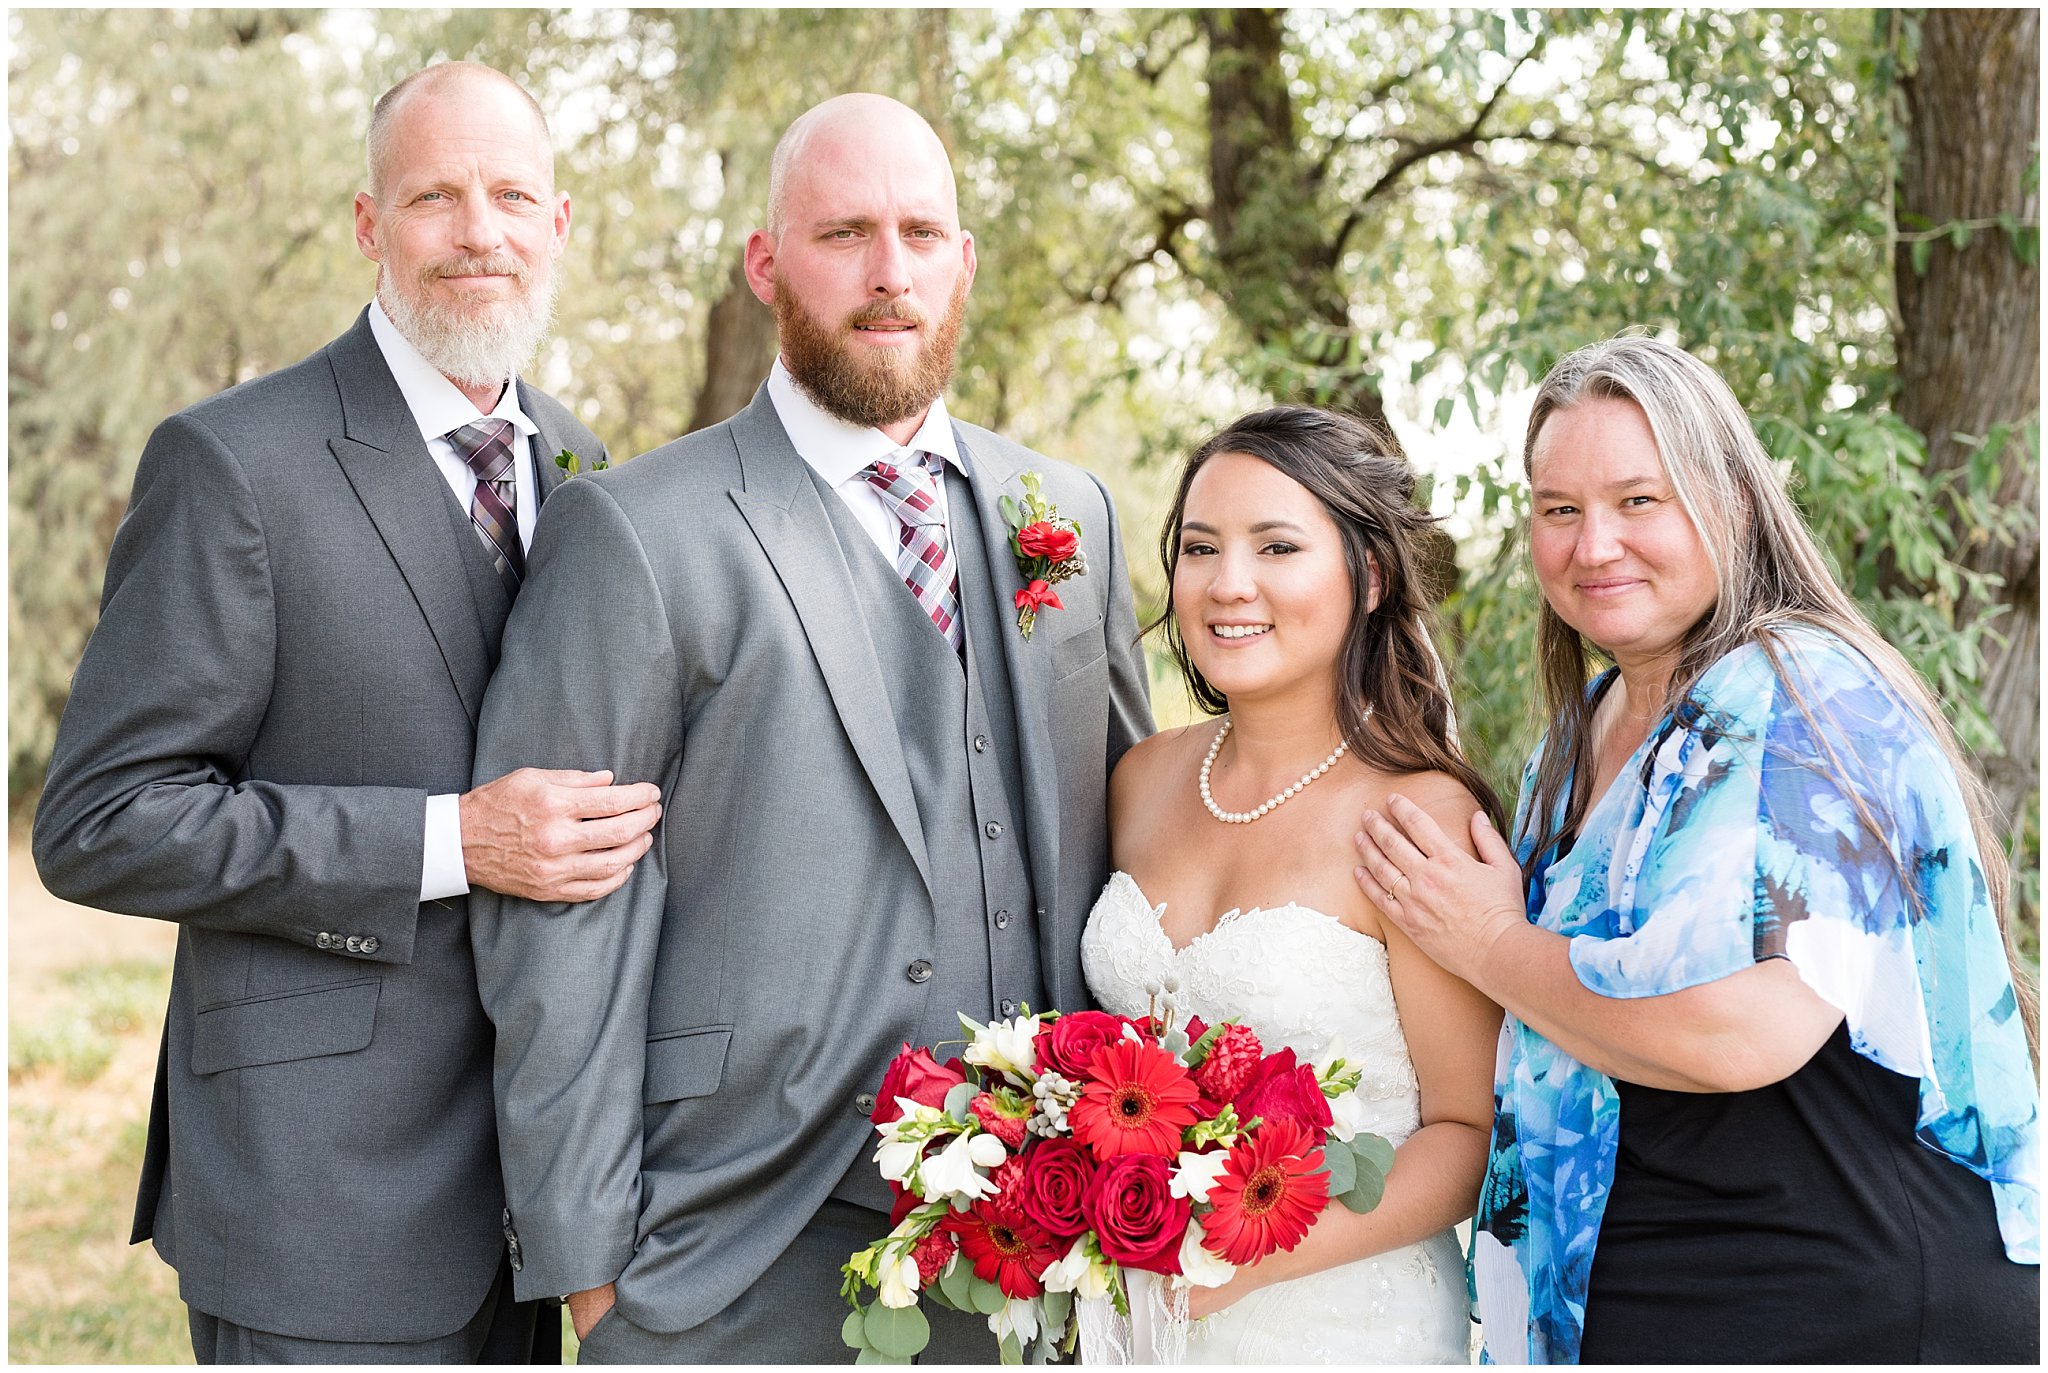 Bride, groom and brides family | Red and Grey wedding | Davis County Outdoor Wedding | Jessie and Dallin Photography